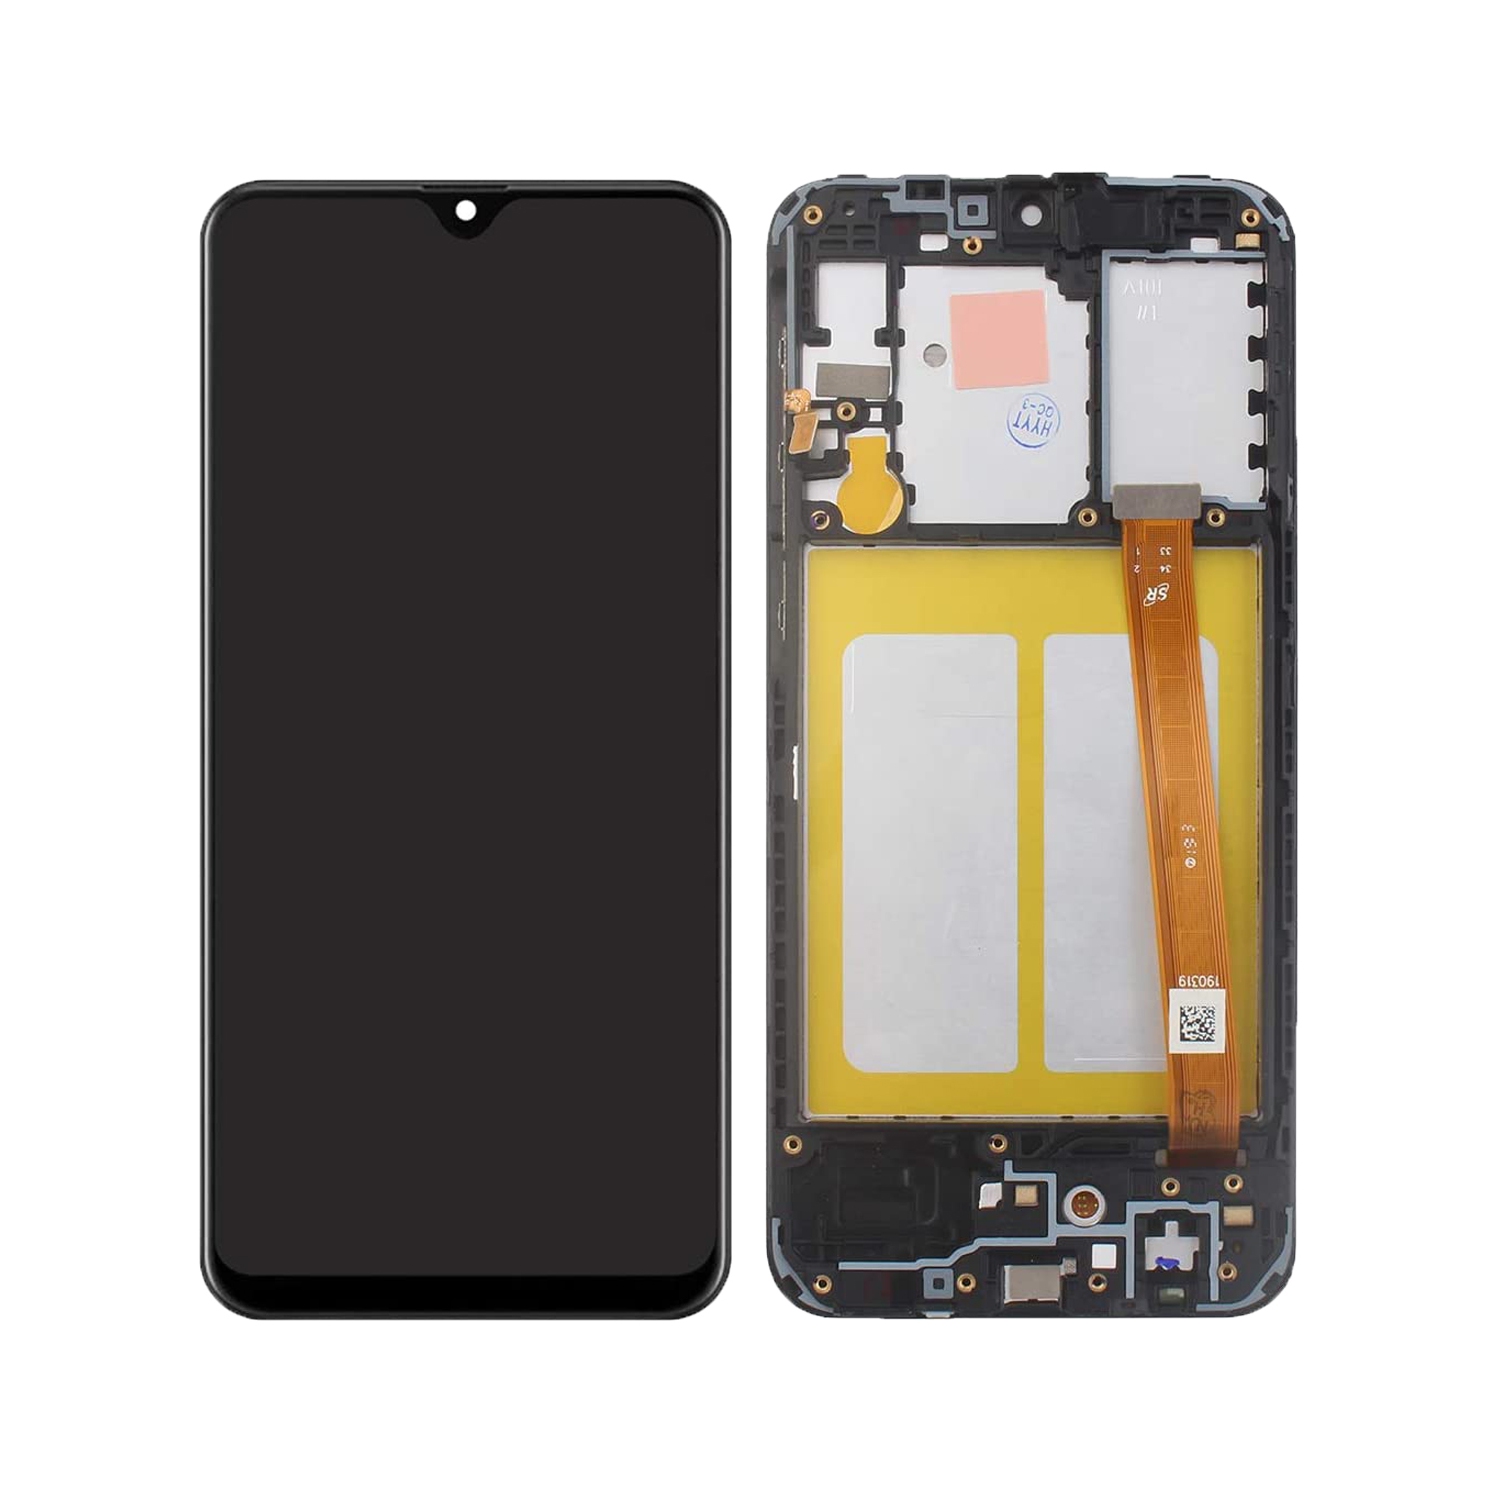 Replacement LCD Display Touch Screen Digitizer Assembly With Frame For Samsung Galaxy A10e - Black